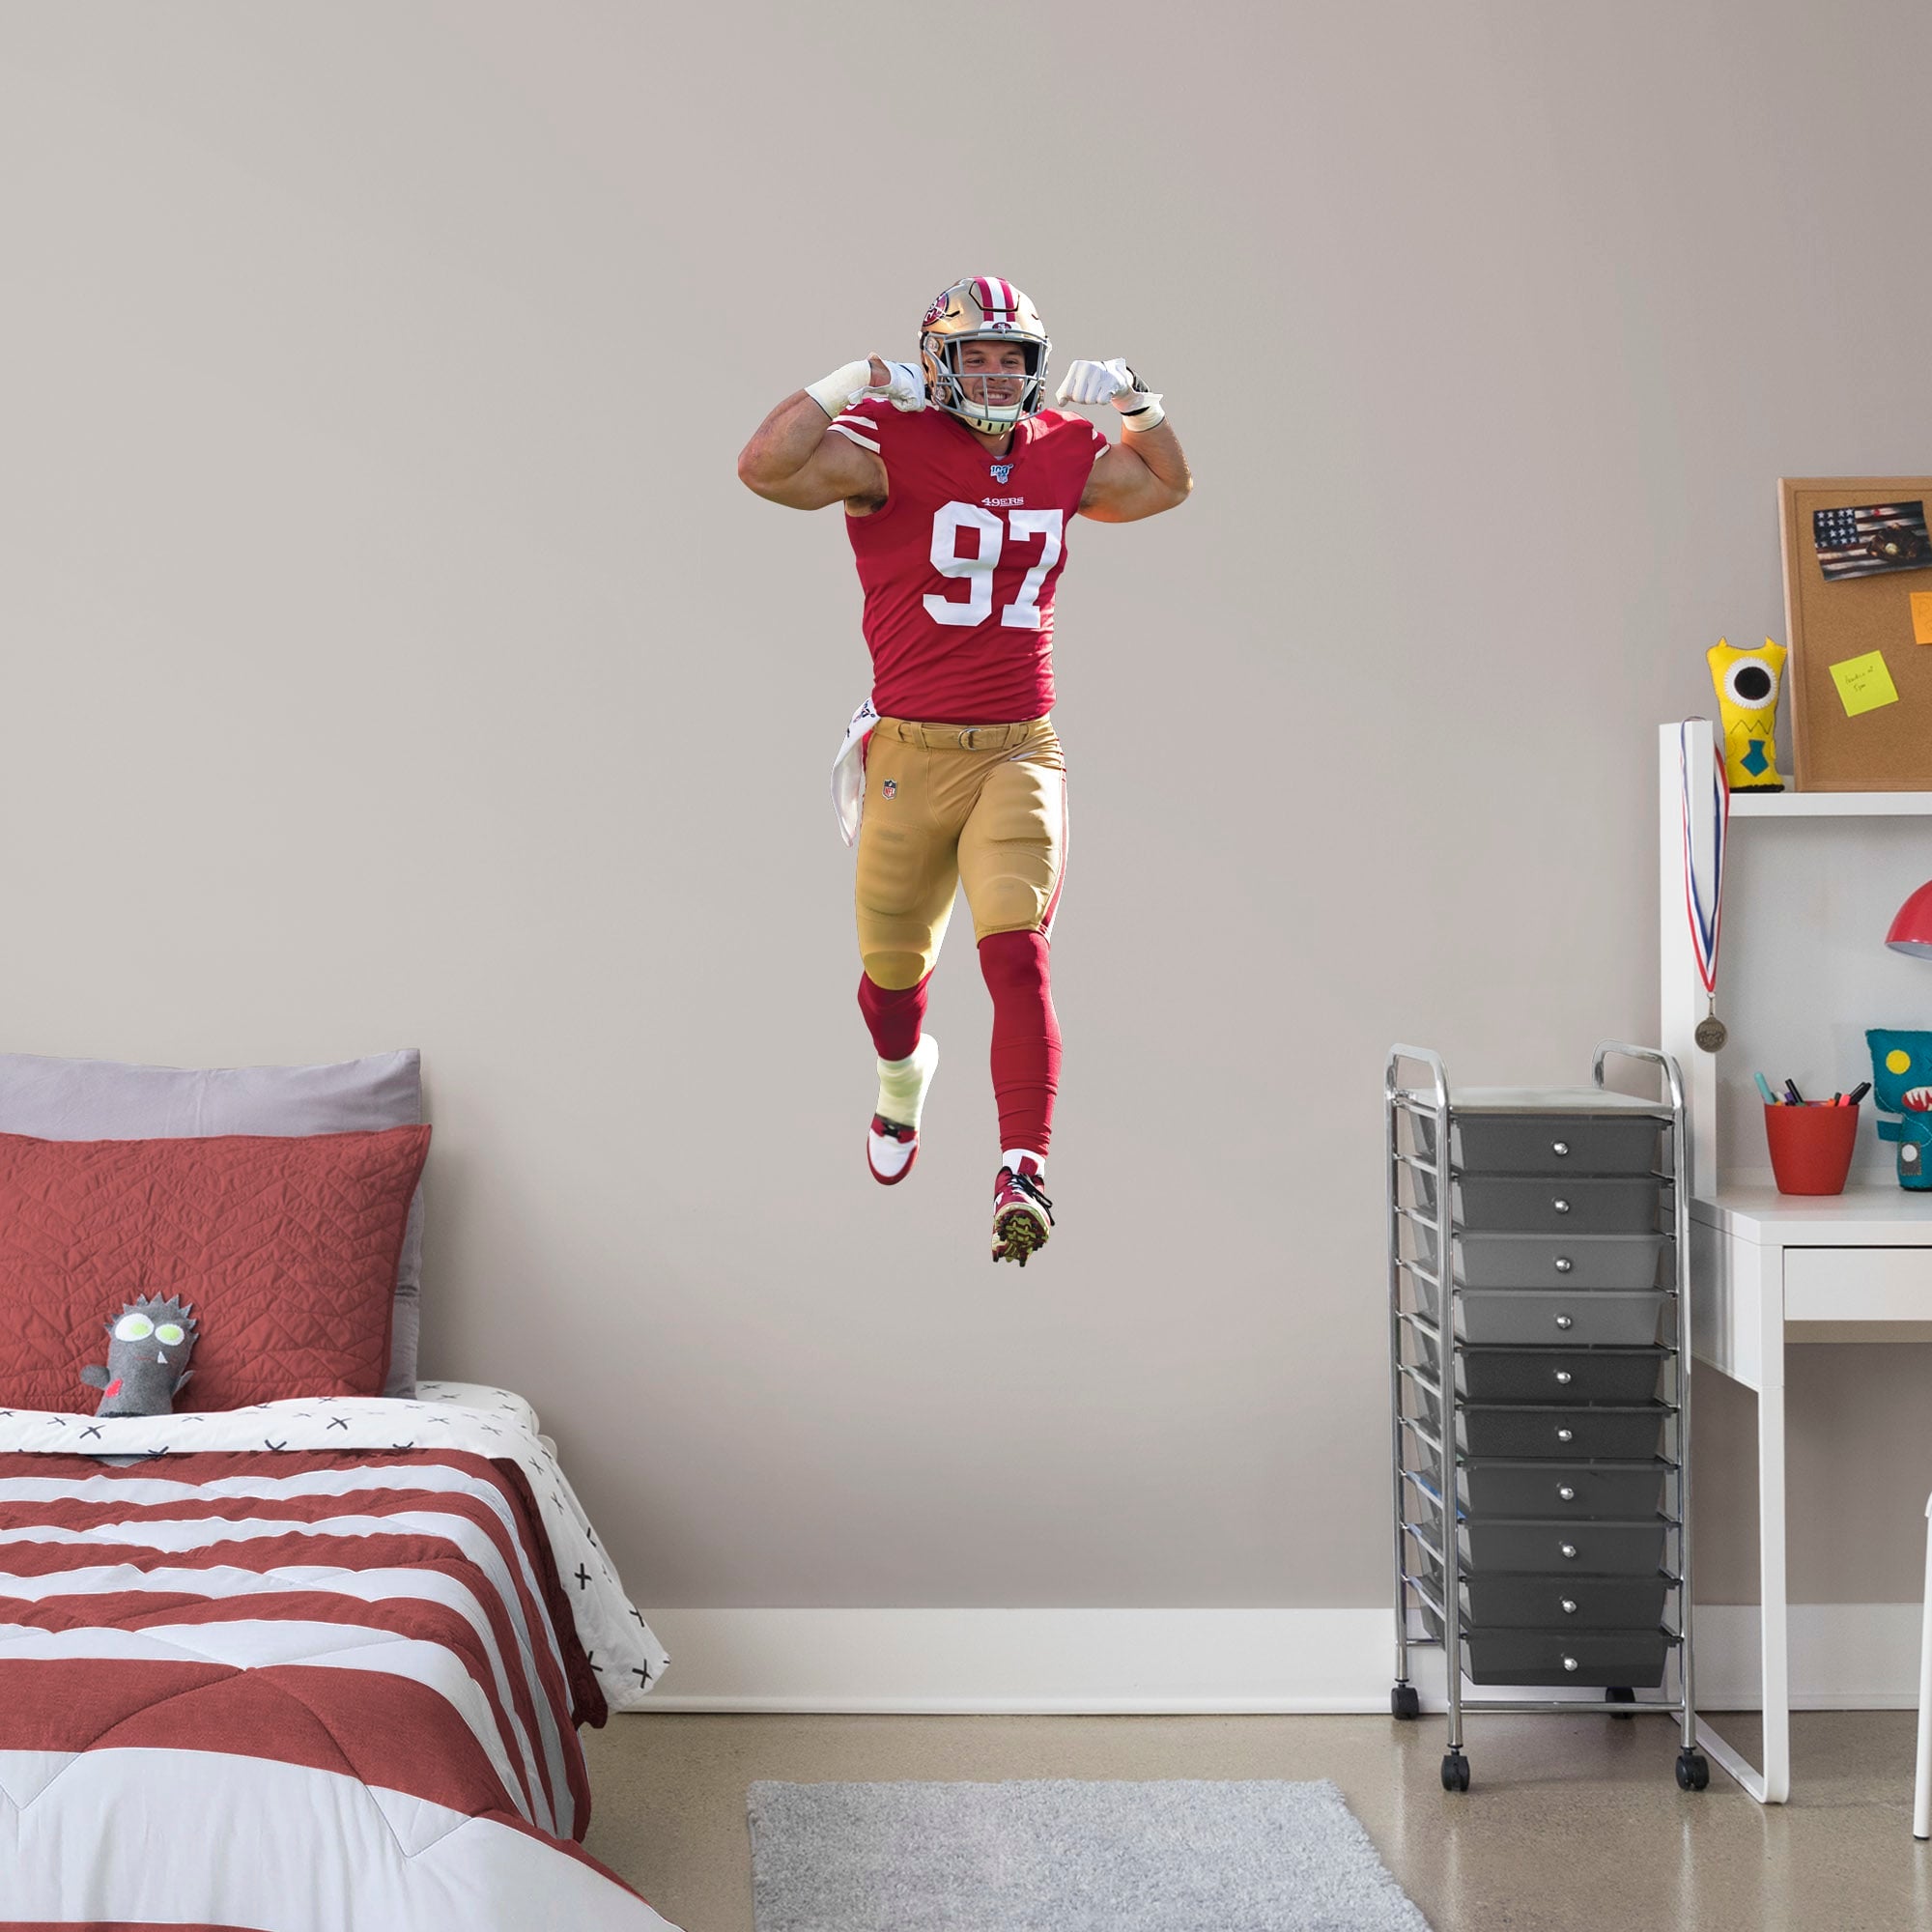 Nick Bosa for San Francisco 49ers: Flex - Officially Licensed NFL Removable Wall Decal Giant Athlete + 2 Decals (23"W x 51"H) by